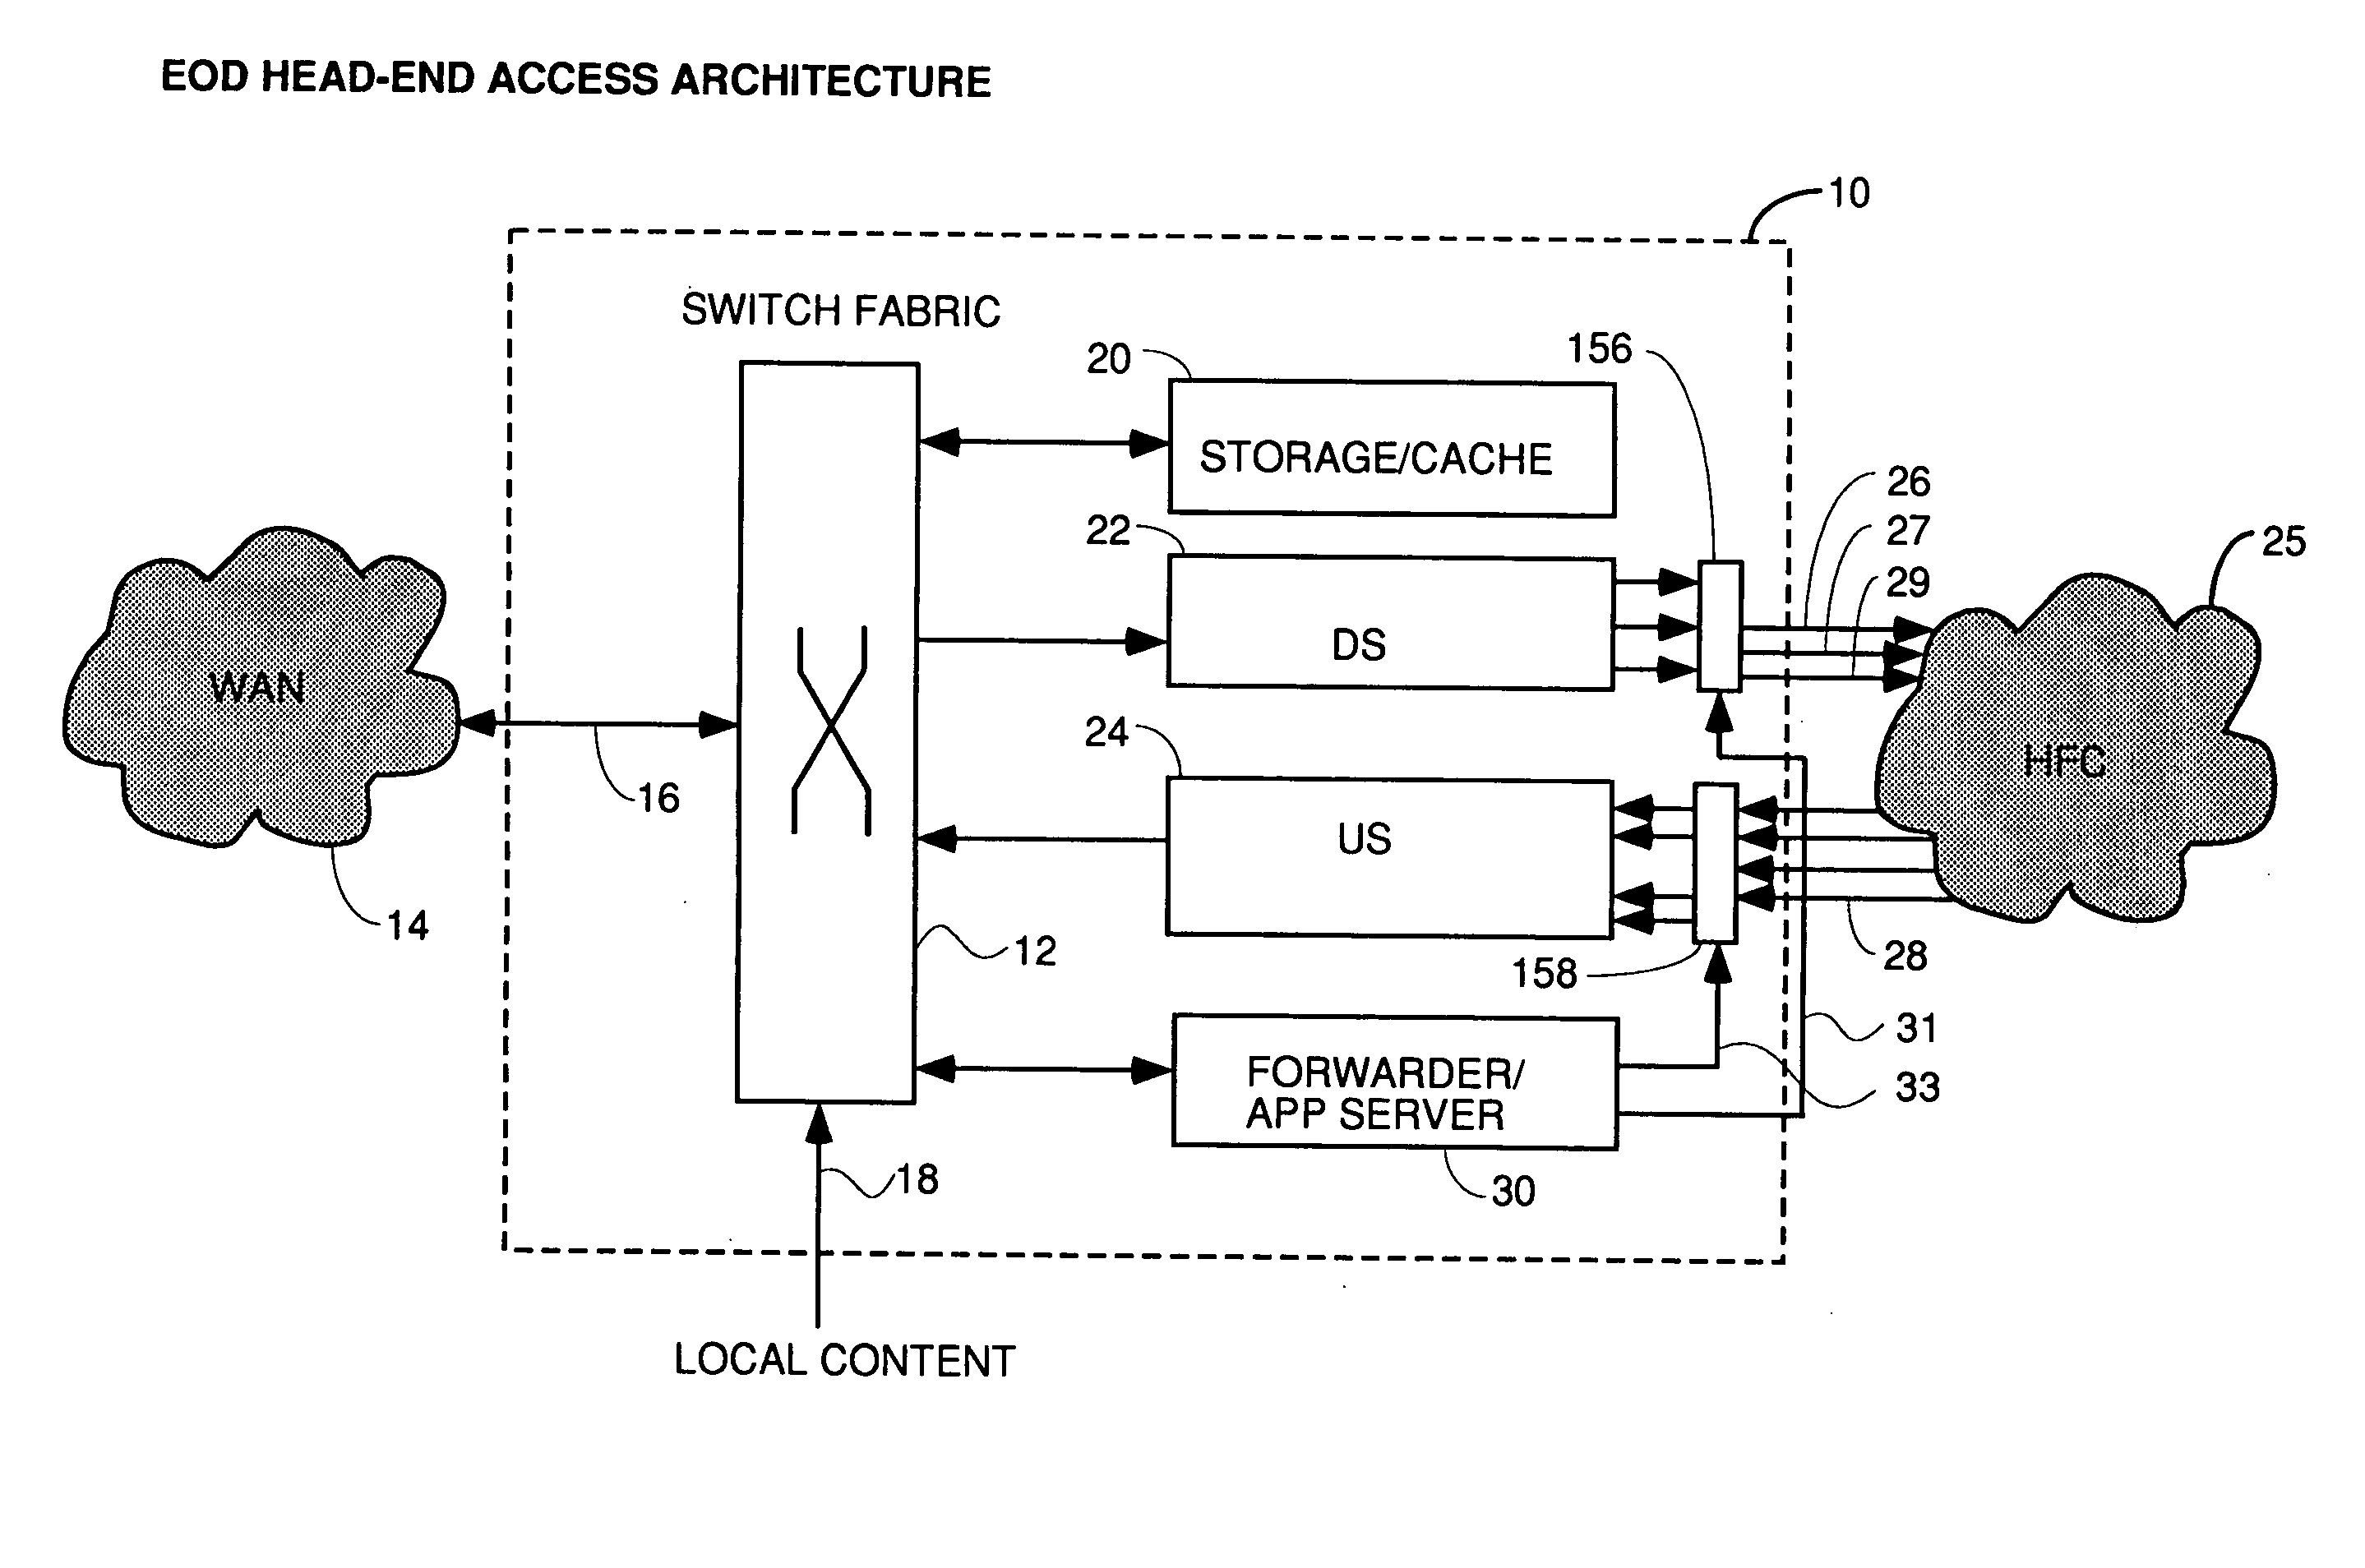 Purification and recovery of fluids in processing applications